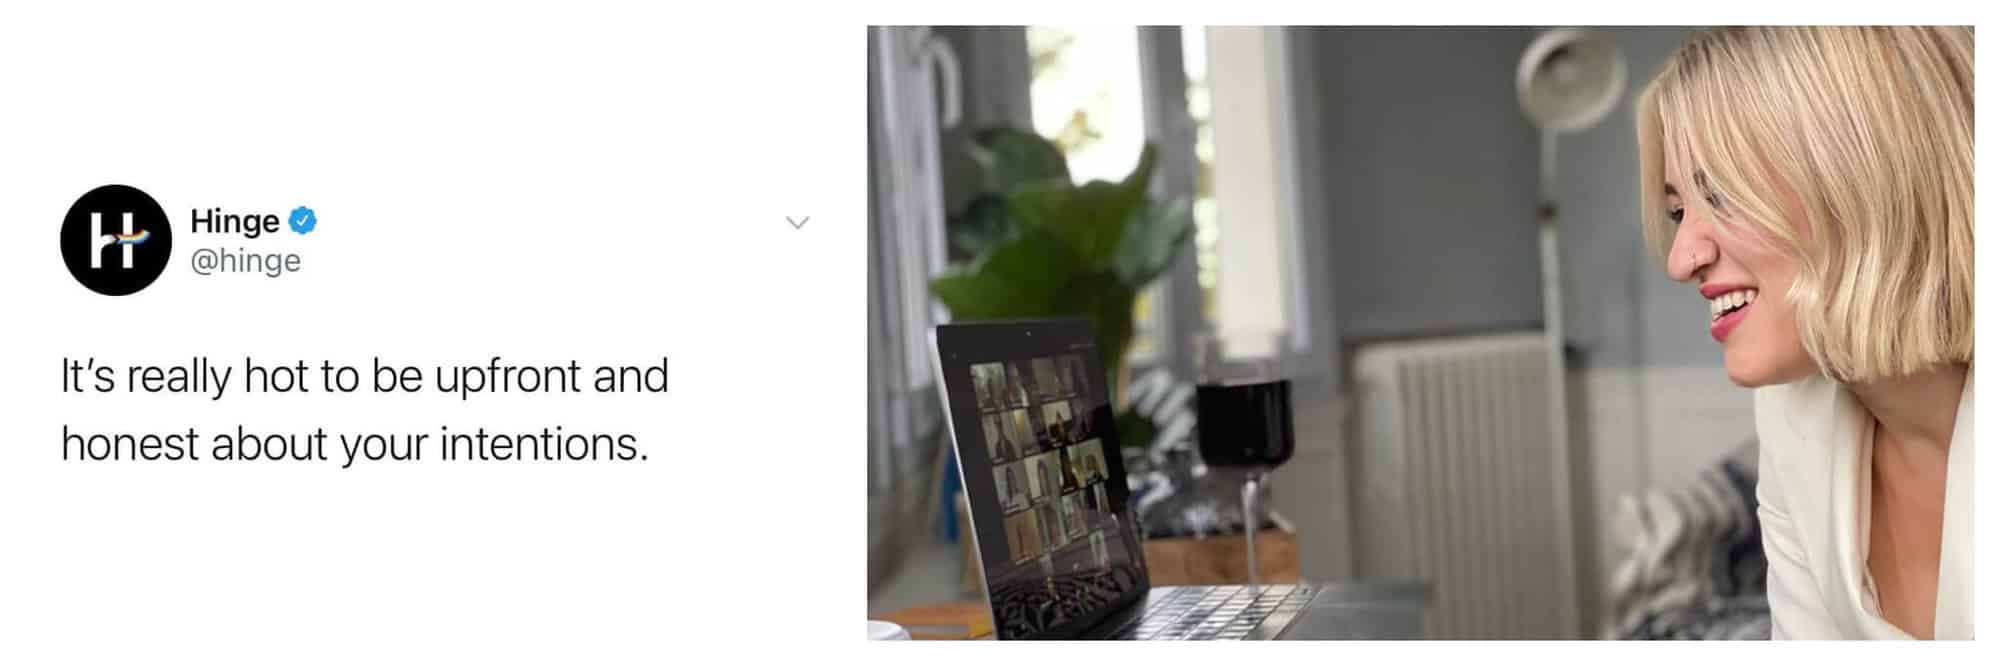 Left: A text box from the application Hinge's Twitter feed that reads "It's really hot to be upfront and honest about your intentions." Right: A blonde woman smiling into her computer screen. She is doing a video chat and she has a glass of red wine next to her.